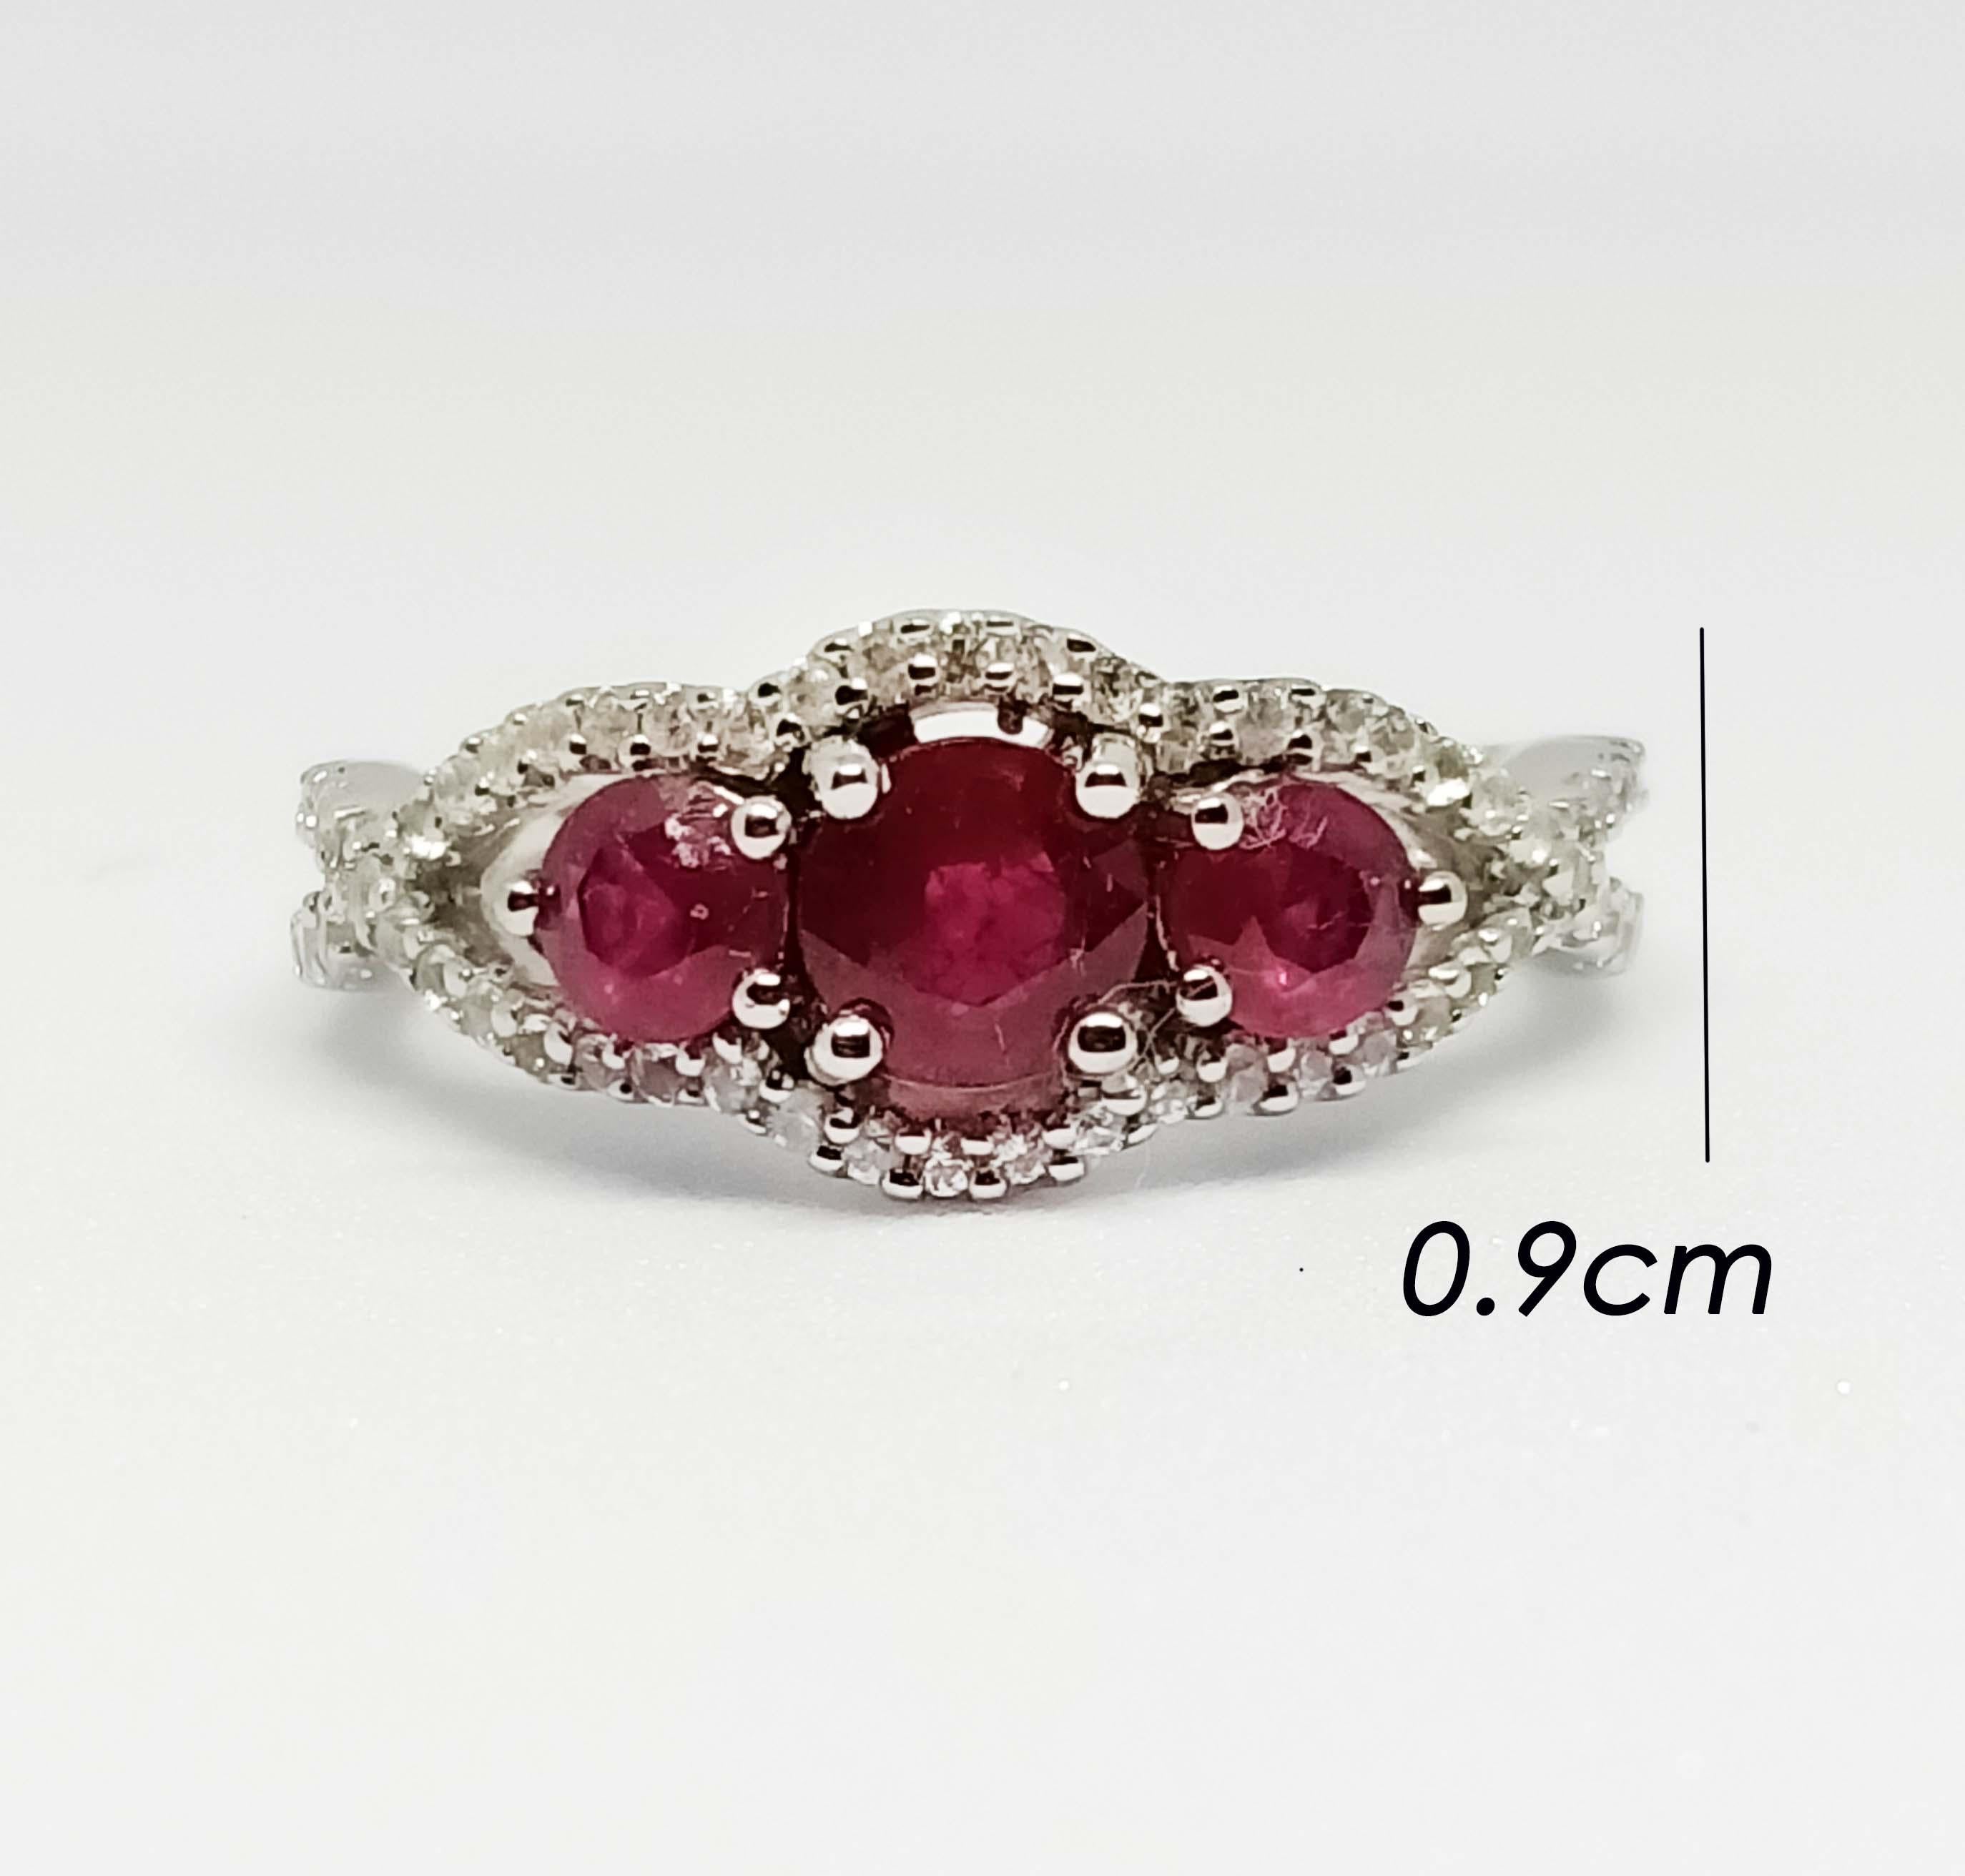 Ruby round 5 mm 1 pc
Ruby roynd 4 mm. 2 pcs total 1.85 cts 
White zircon 1 mm. 52 pcs.
White gold Plated over stering silver.
size 8 us.

Can be smaller resizable free. take up 7 days before ship.